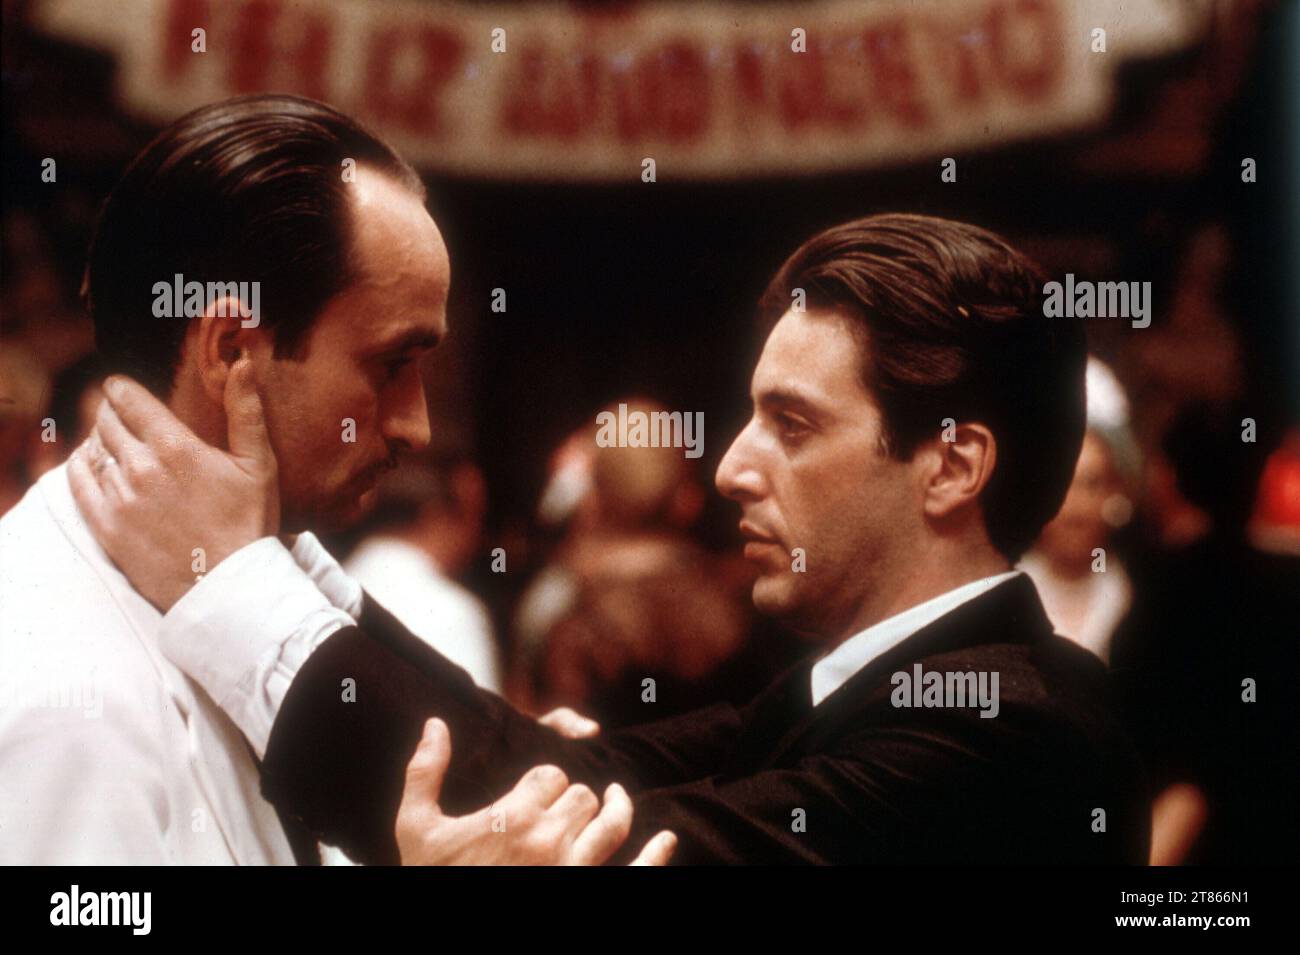 AL PACINO and JOHN CAZALE in THE GODFATHER PART II (1974), directed by FRANCIS FORD COPPOLA. Credit: PARAMOUNT PICTURES / Album Stock Photo